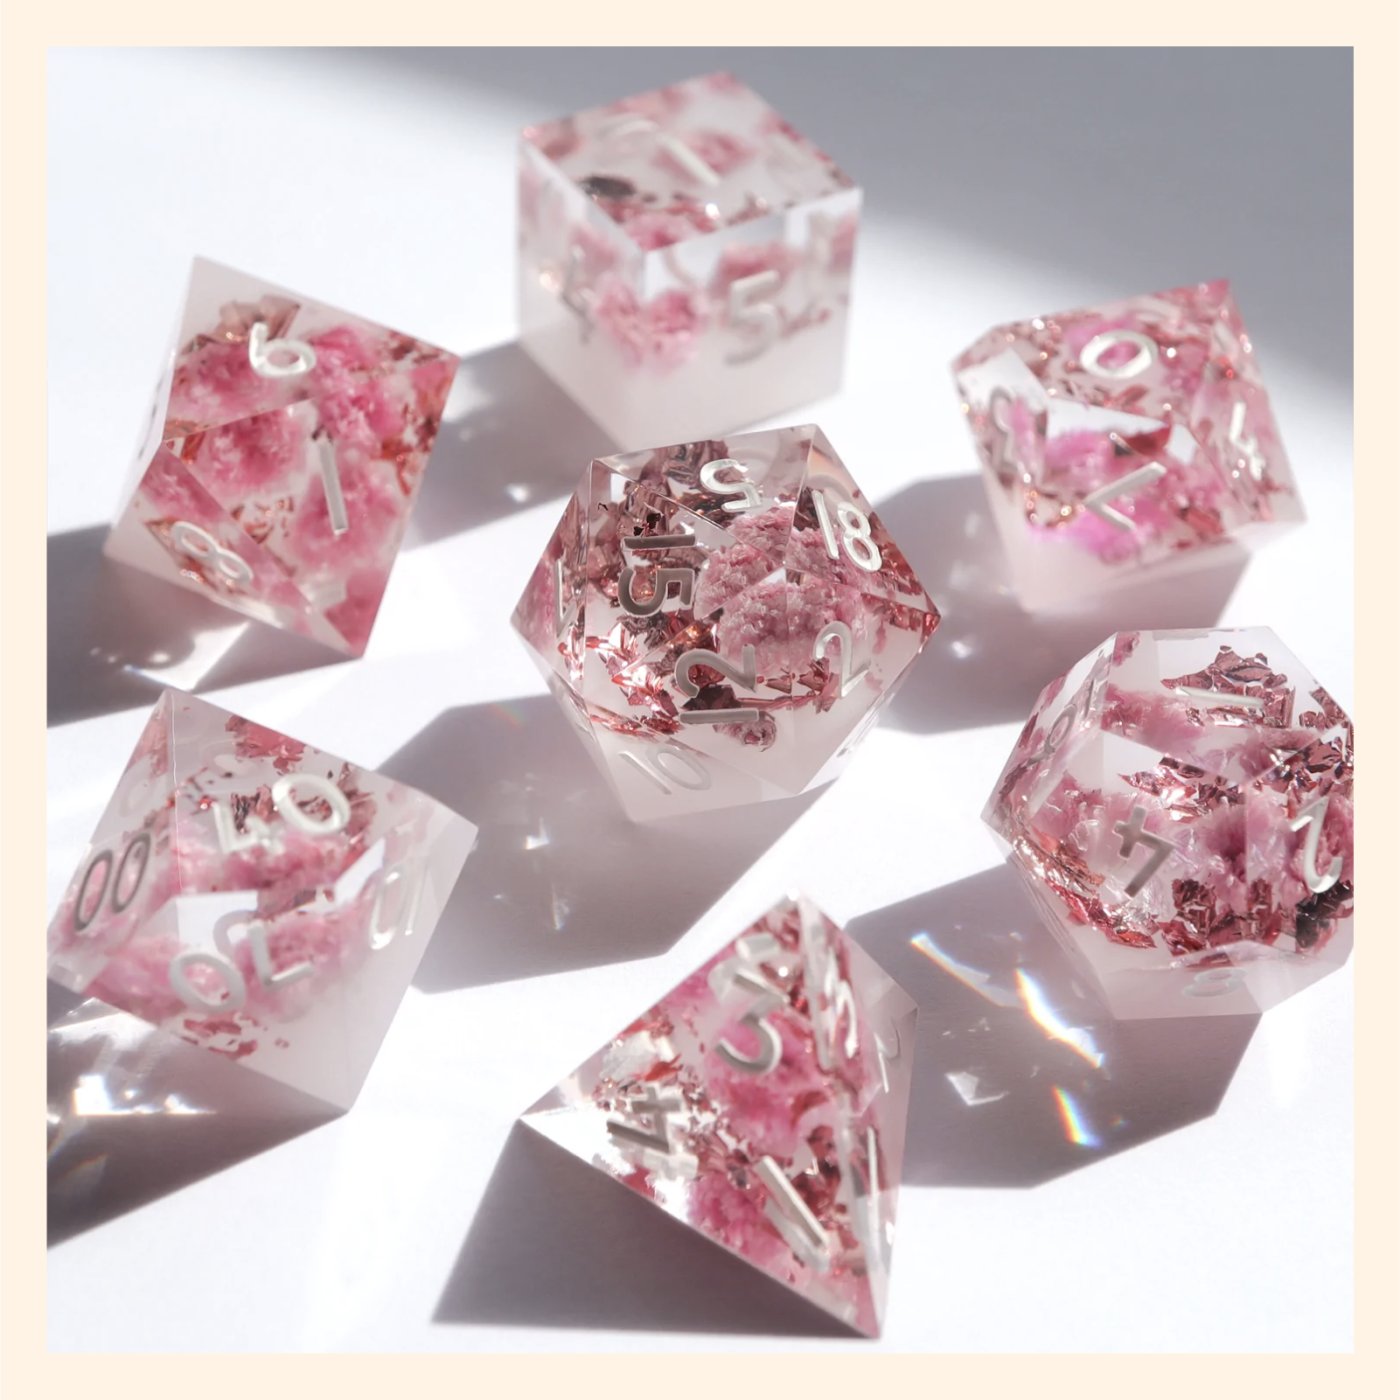 Acryllic Dungeons and Dragons dice set inlaid with gold foil and real pink flowers